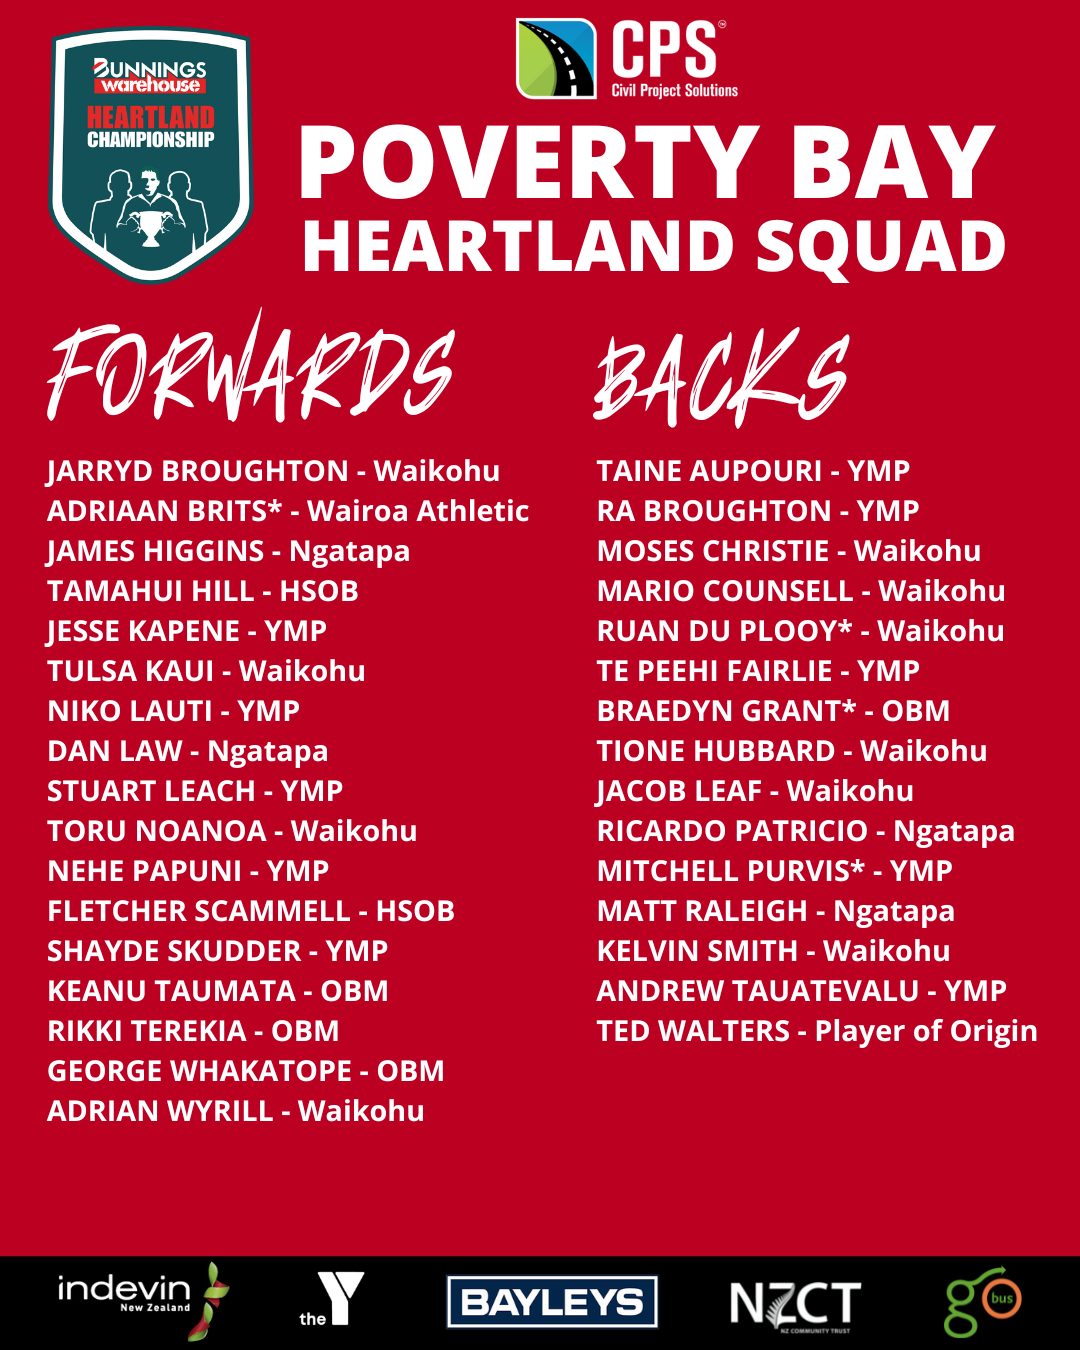 2022 CPS Poverty Bay Heartland Squad named